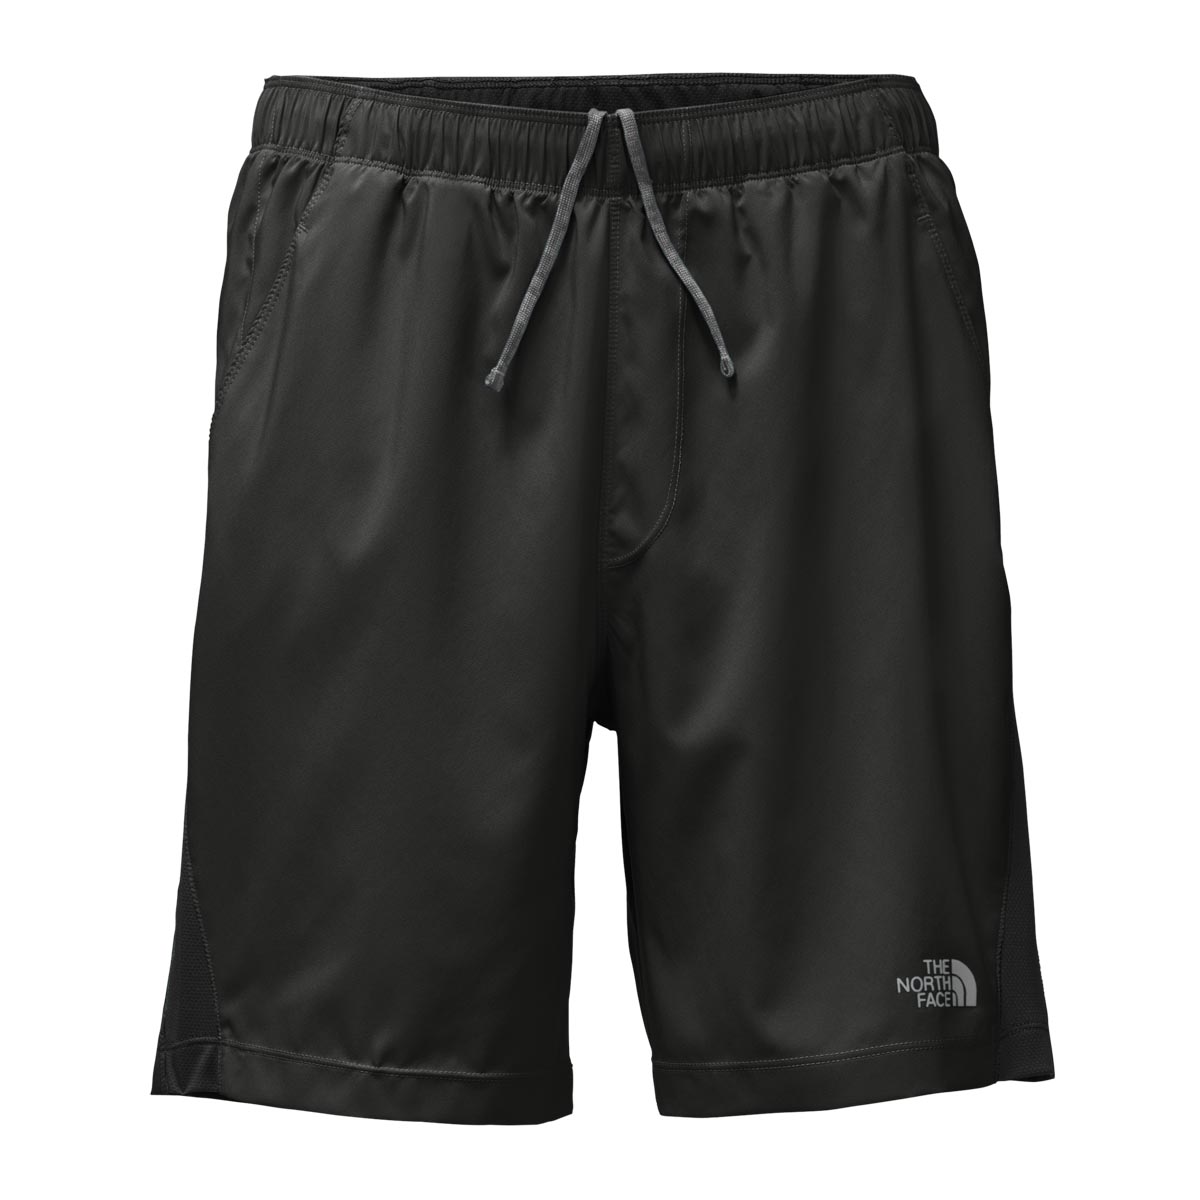 The North Face Mens Reactor Short